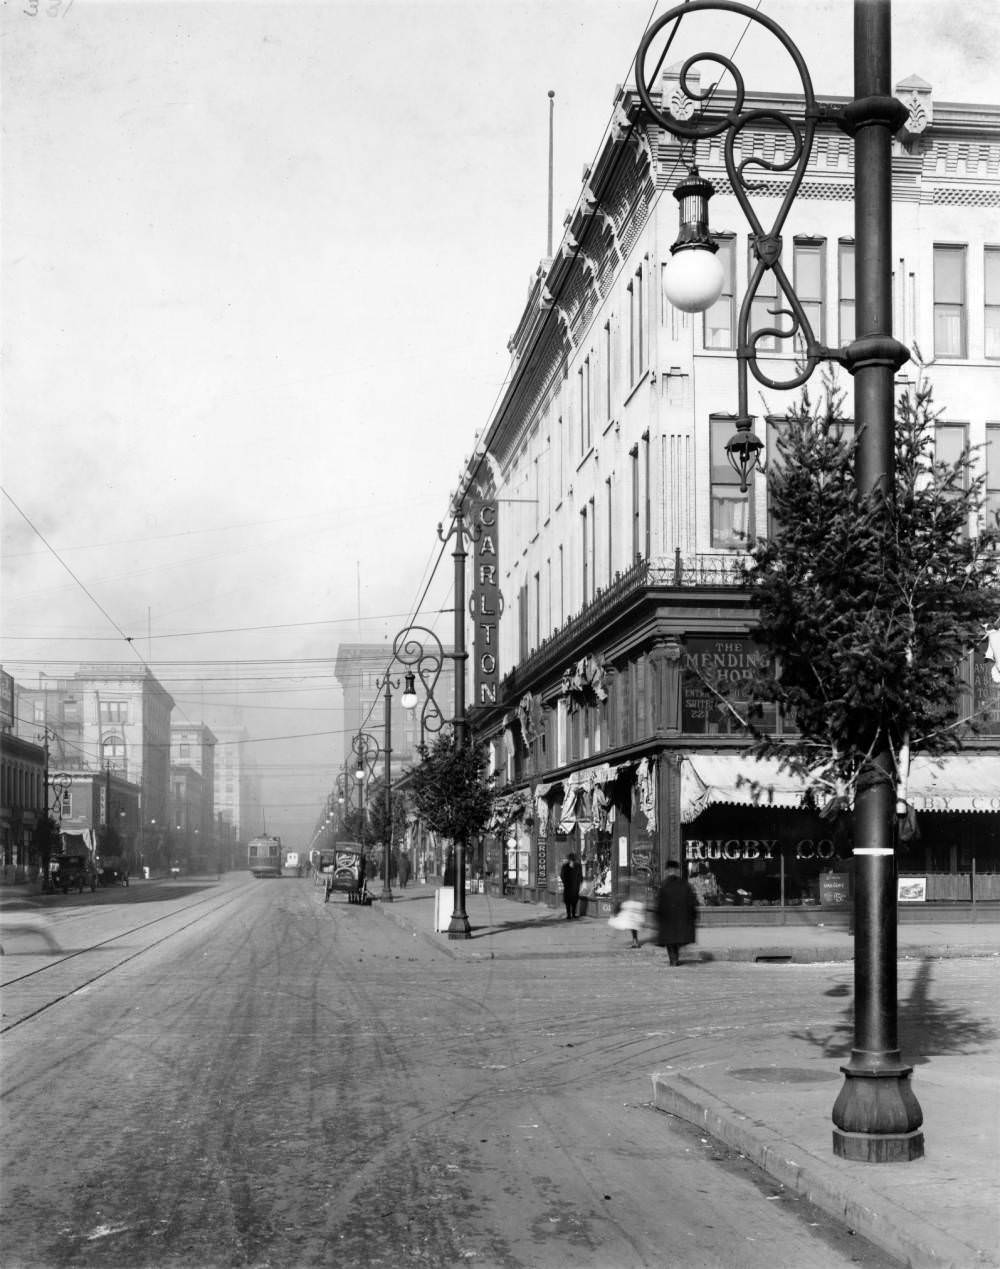 Intersection of 15th and Glenarm Streets in Denver, featuring cars, a streetcar, and Christmas trees, 1900s